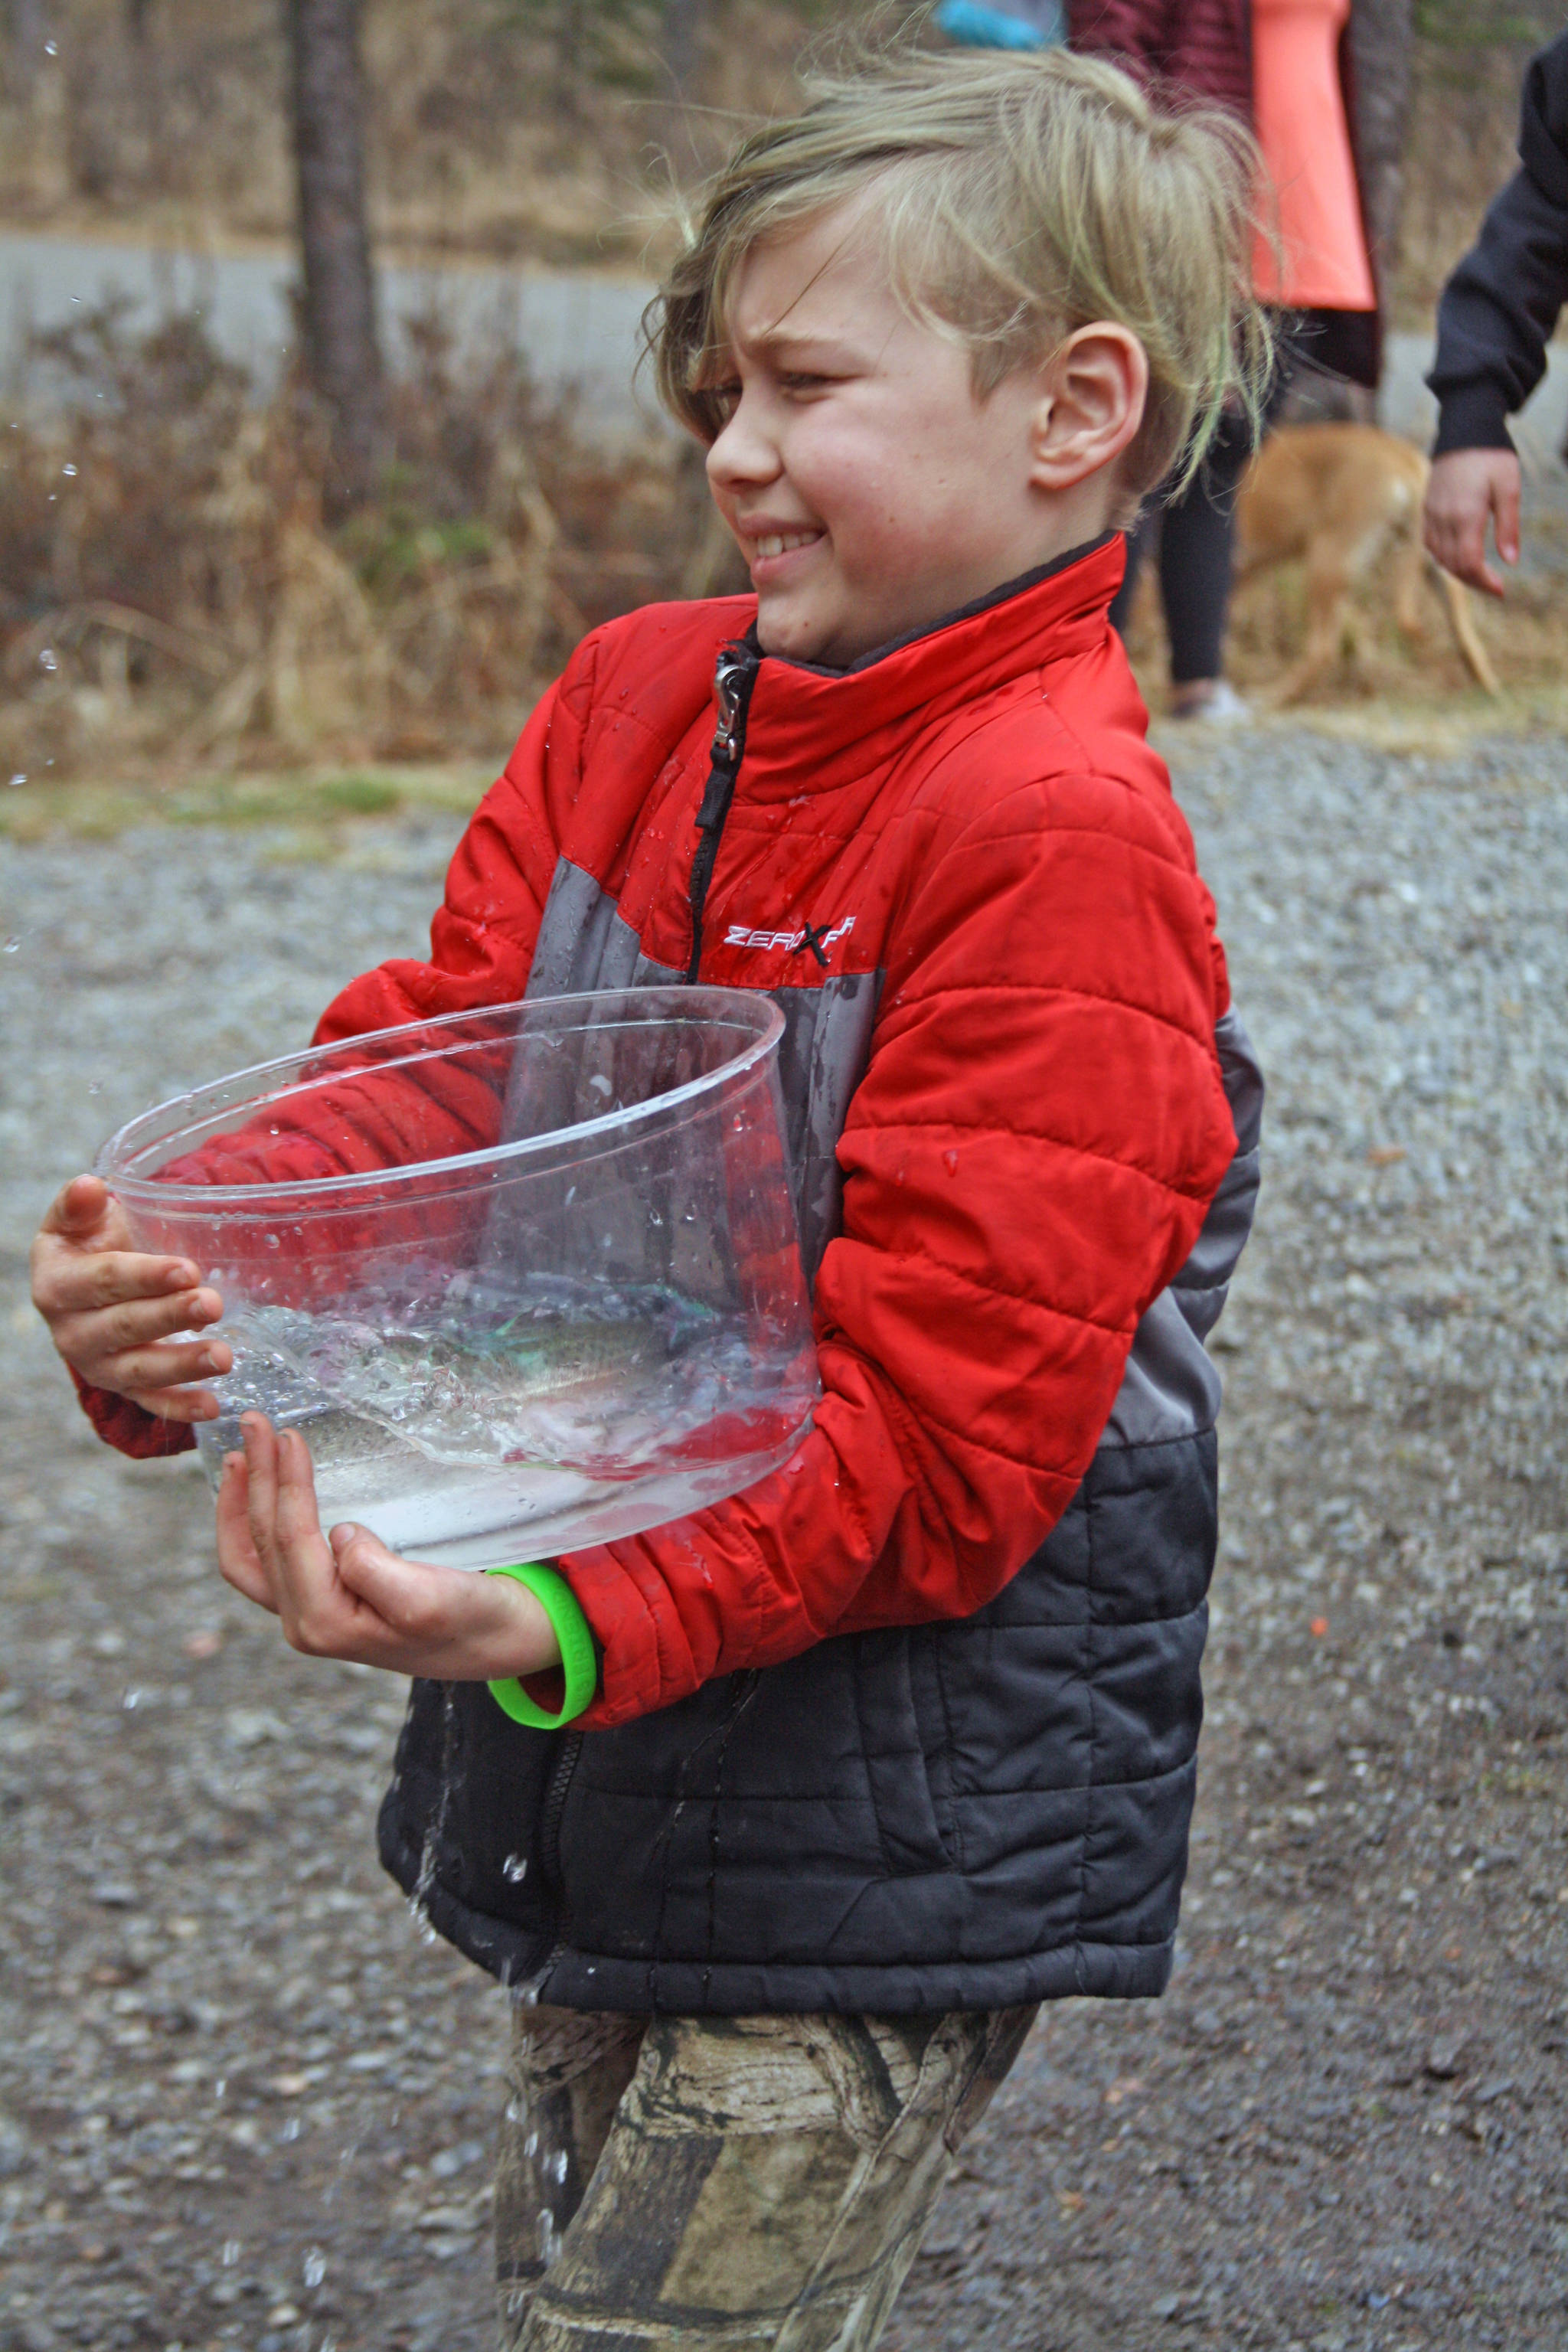 A student carries a rainbow trout at Johnson Lake State Recreation Site in Kasilof. Approximately 950 borough students released 5,000 fish into Johnson Lake as part of an Alaska Department of Fish and Game restocking effort. (Photo by Erin Thompson/Peninsula Clarion)